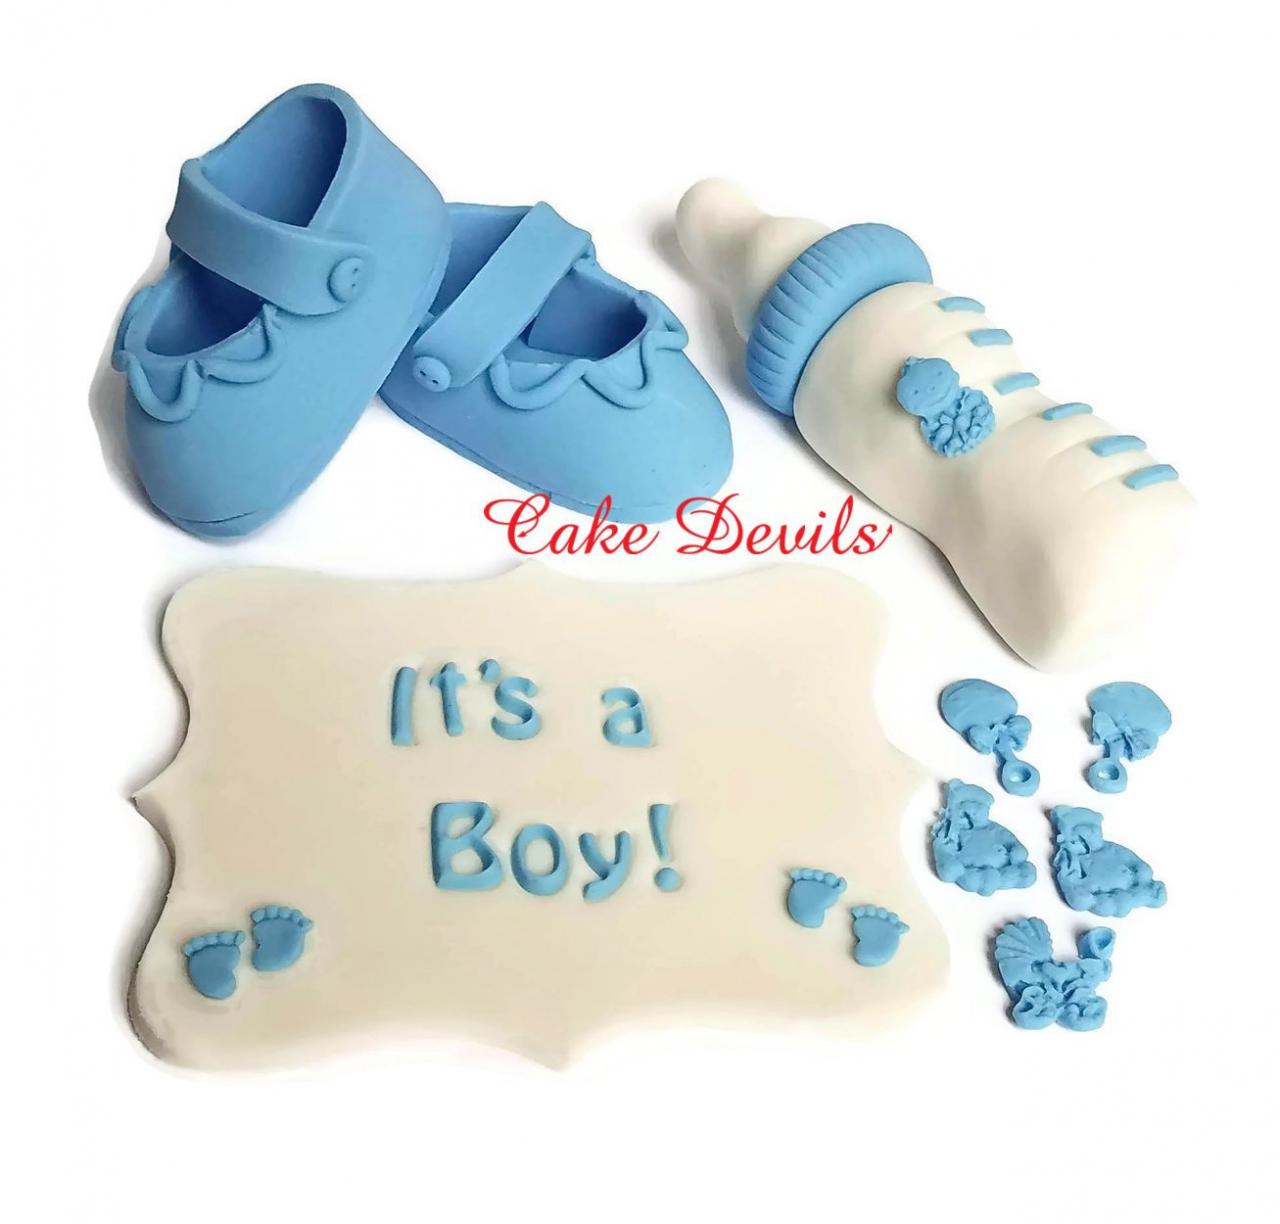 Baby Shower Fondant Cake Toppers, Baby Booties Cake Decoration, Fondant Bottle, It's A Boy, It's A Girl, Rattle, Bear,